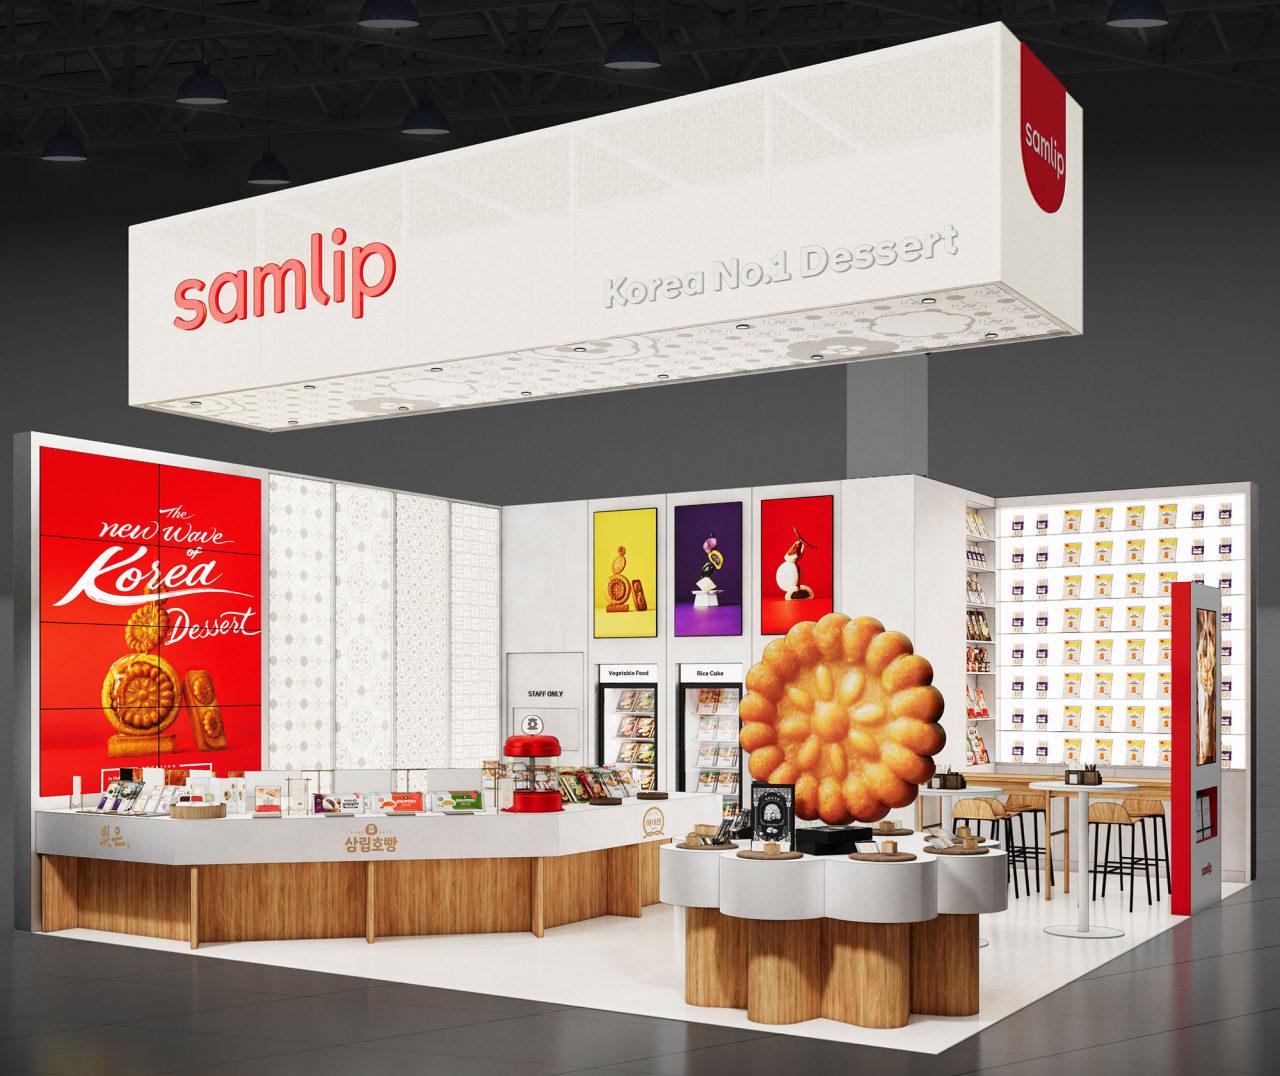 SPC Samlip's booth to be showcased at this year's Anuga food trade fair in Cologne, Germany. (SPC Samlip)